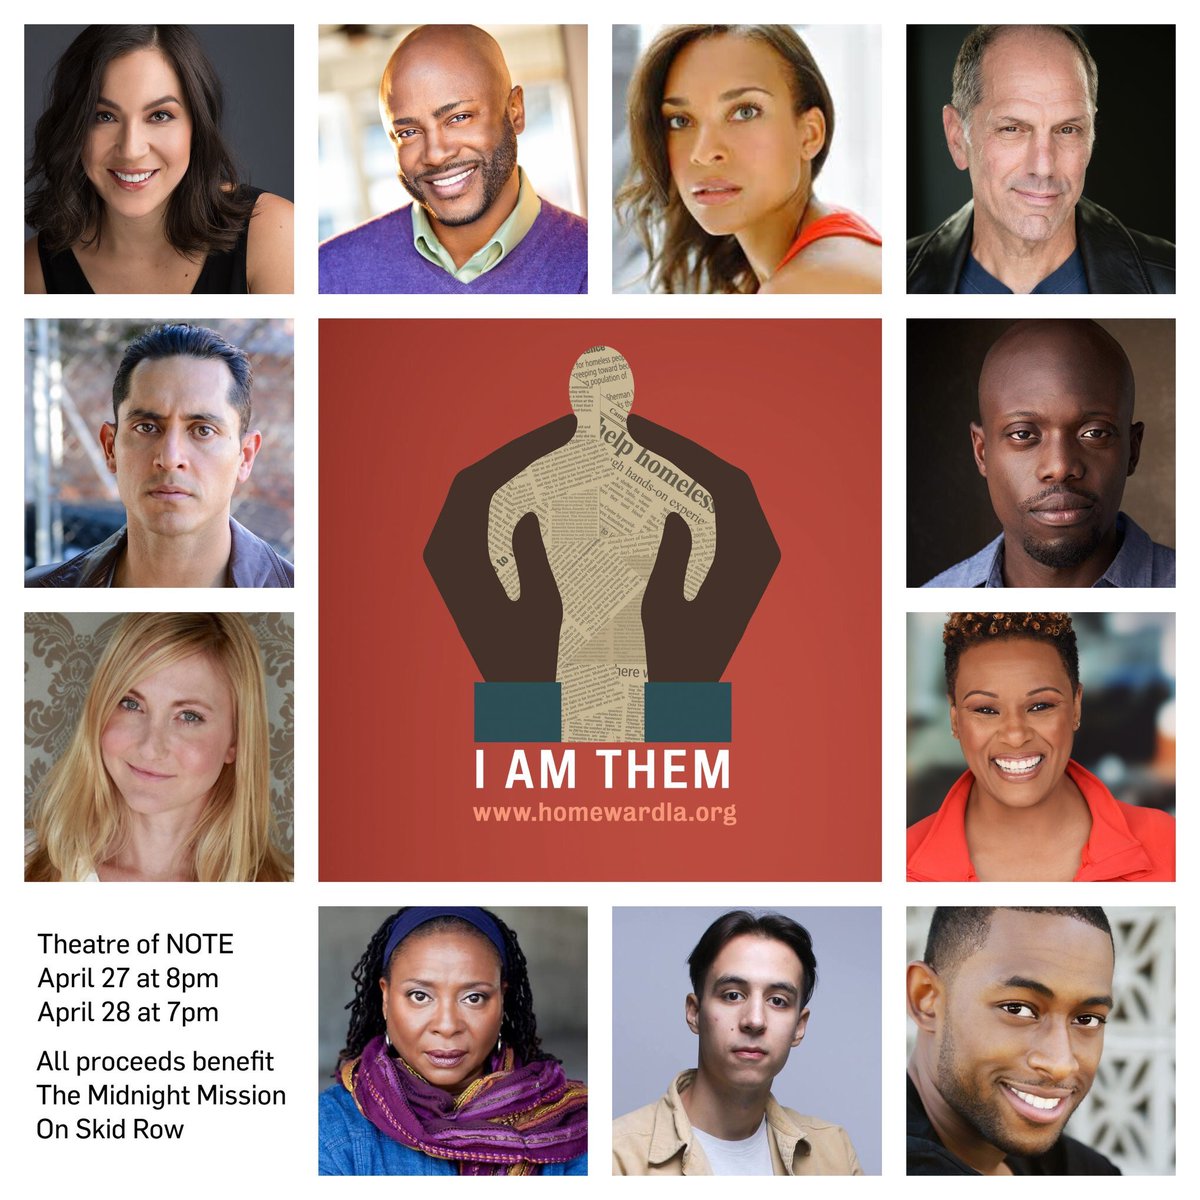 This weekend. Eleven actors perform the stories of eleven real people who have experienced homelessness. Theatre of NOTE, Saturday at 8pm and Sunday at 7pm. 100% of the proceeds go to The Midnight Mission on Skid Row. Tickets available here: hlatheaterofnote.brownpapertickets.com #HomewardLA